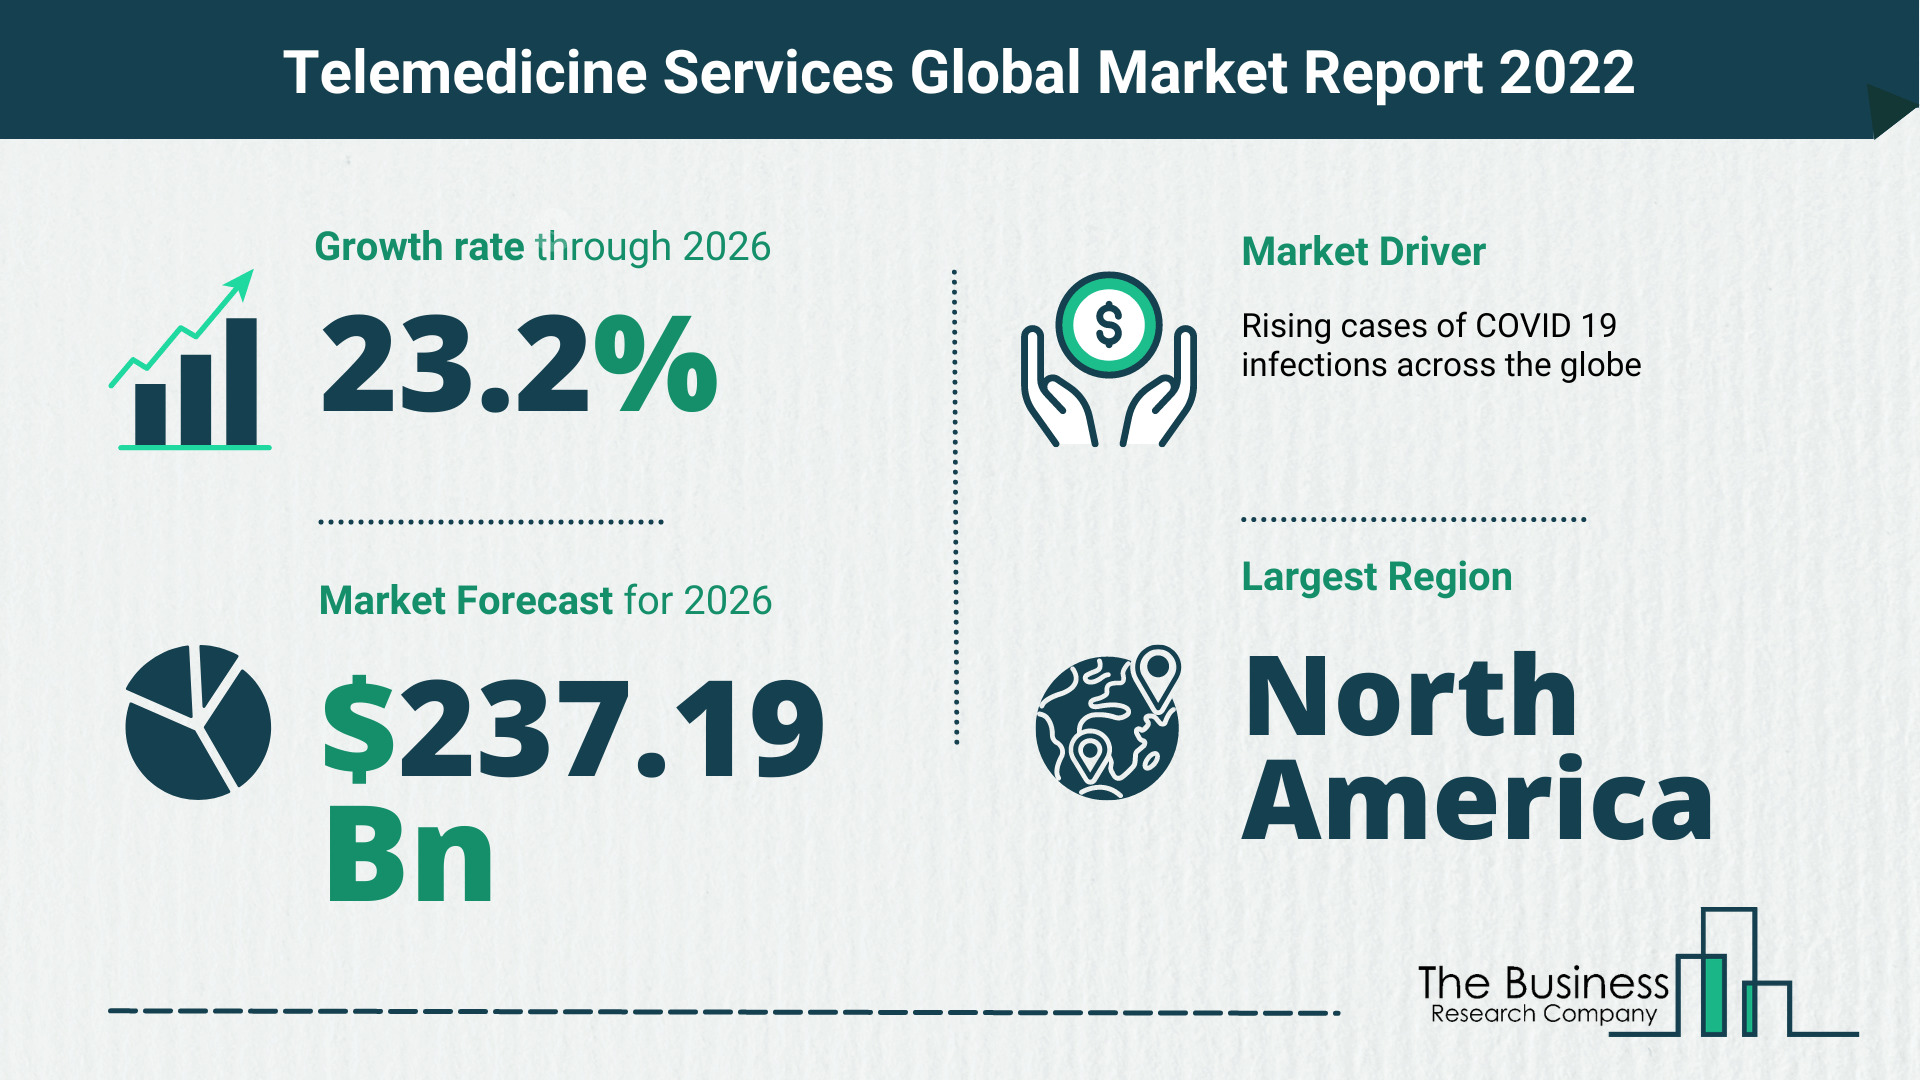 How Will The Telemedicine Services Market Grow In 2022?